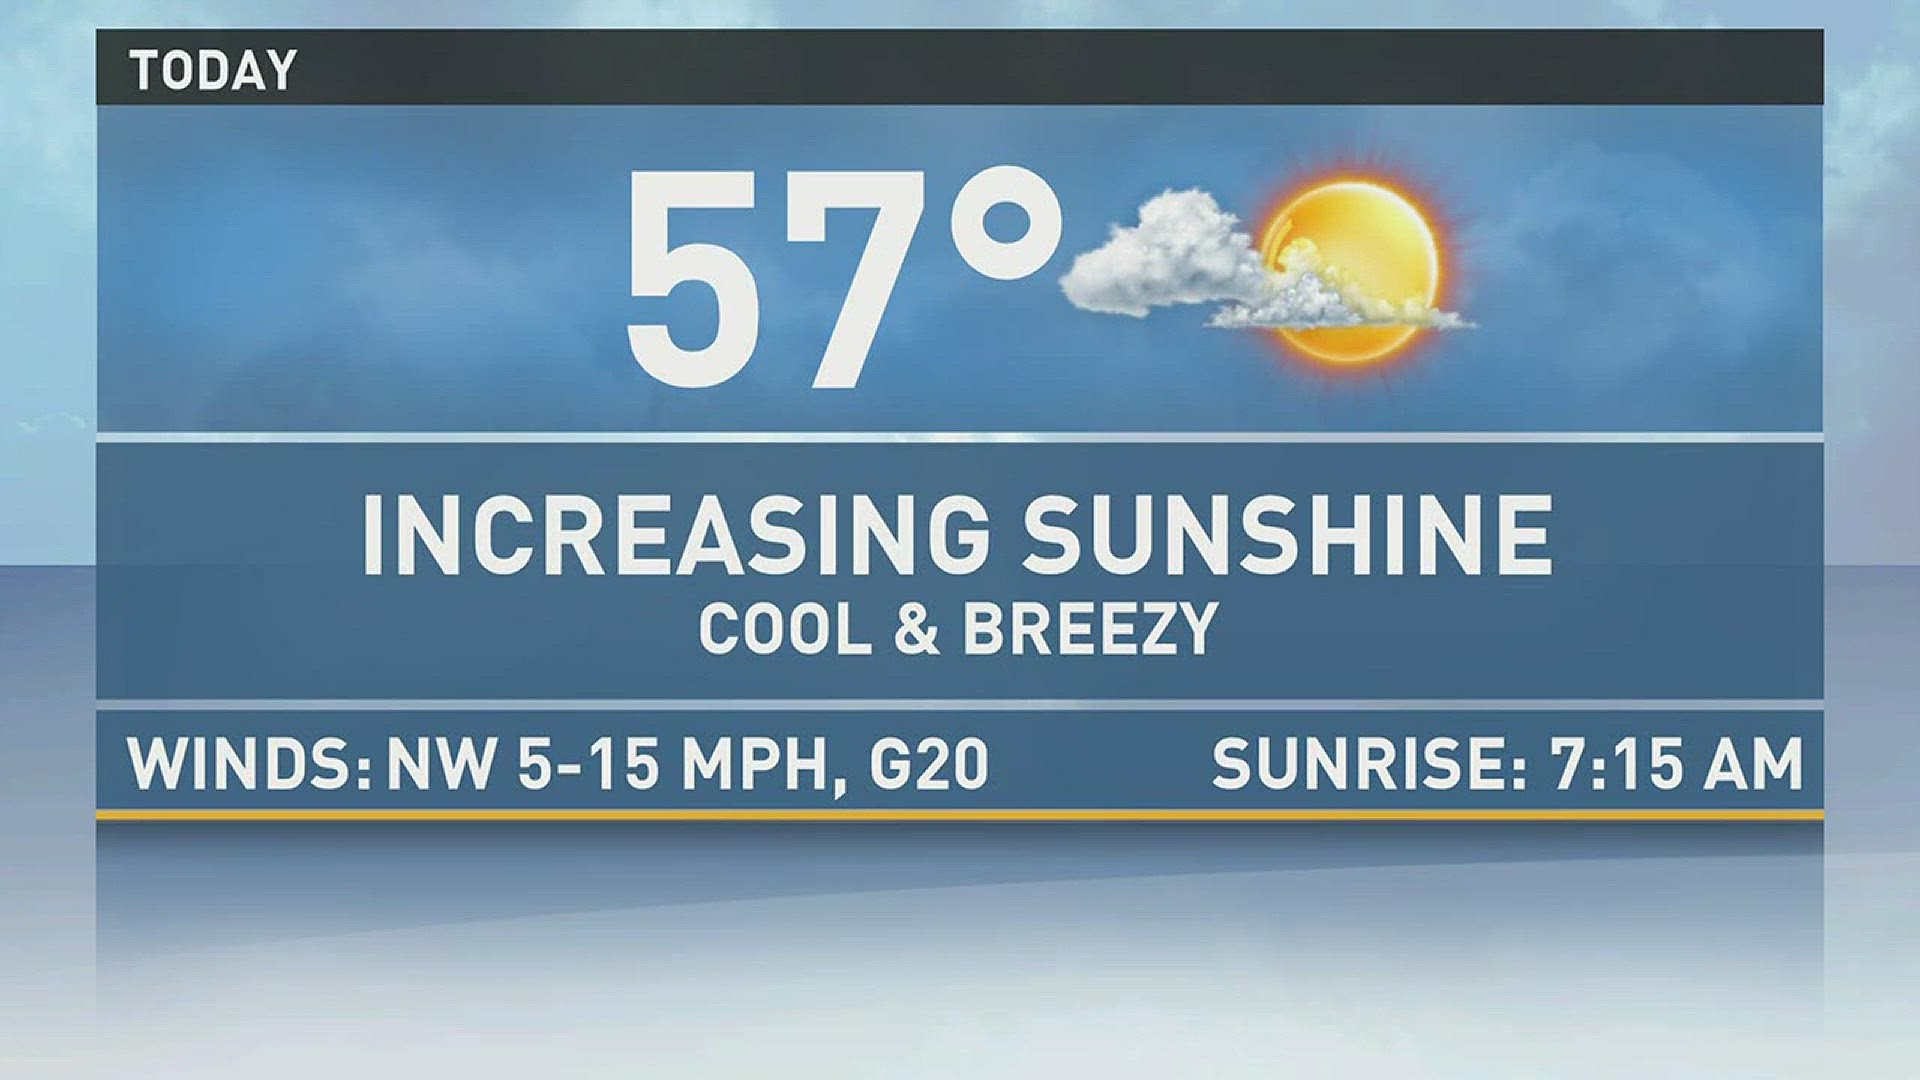 Rebecca Sweet has your Friday morning forecast, we're starting off cool but will warm into the mid 50's during the day.